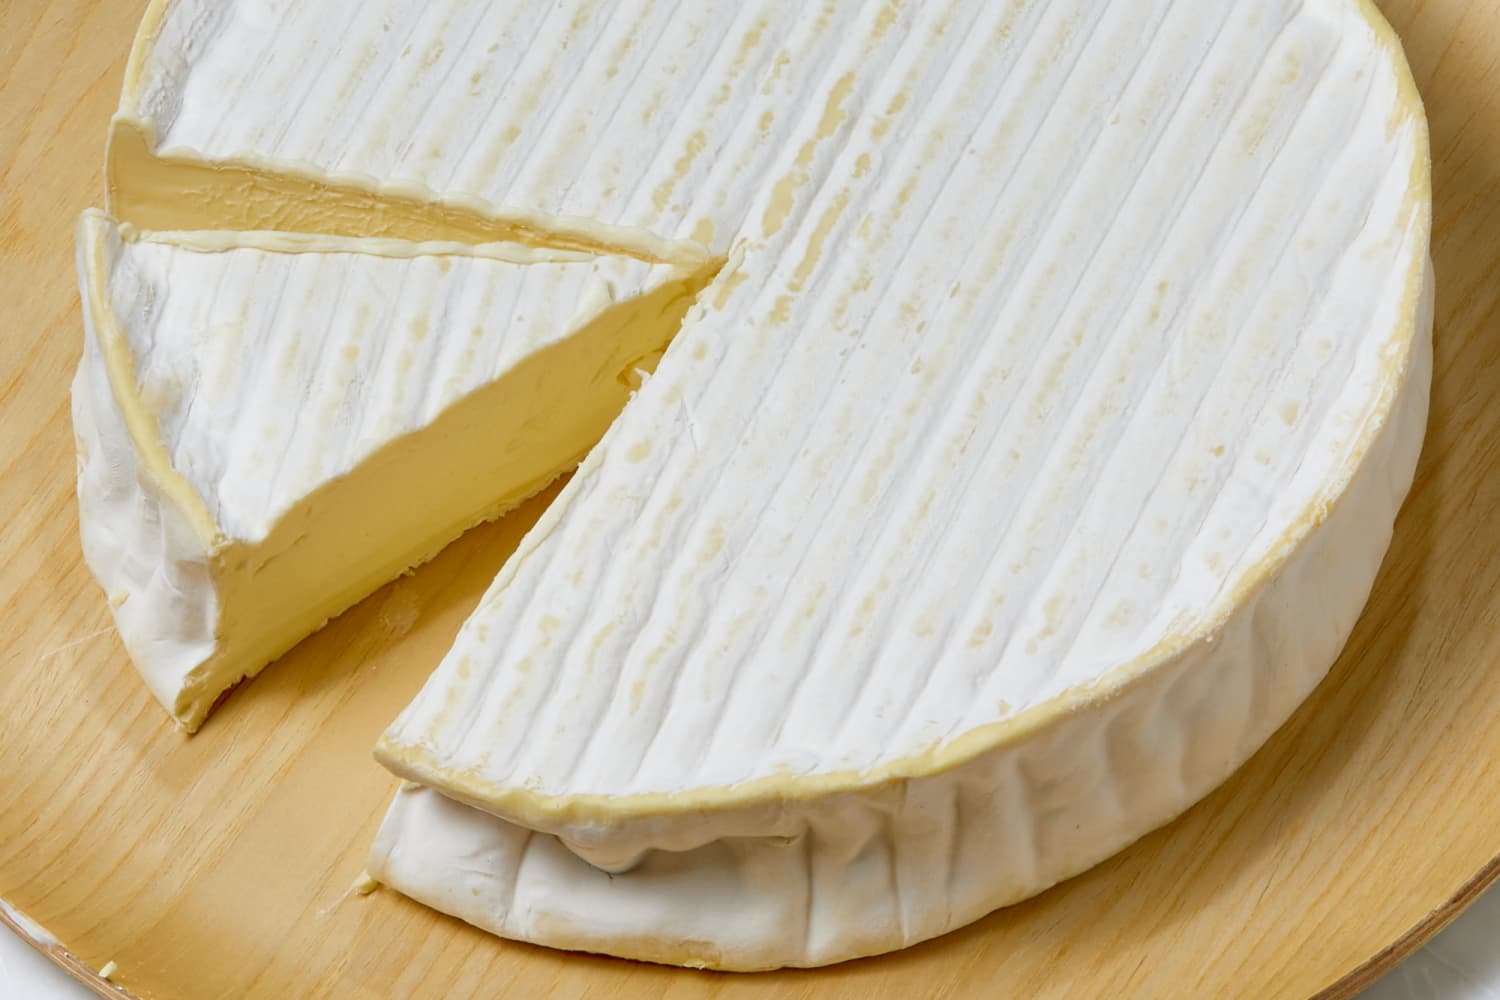 https://cdn.apartmenttherapy.info/image/upload/f_auto,q_auto:eco,c_fill,g_auto,w_1500,ar_3:2/k%2FPhoto%2FSeries%2F2023-11-how-to-eat-brie%2Fhow-to-eat-brie-381